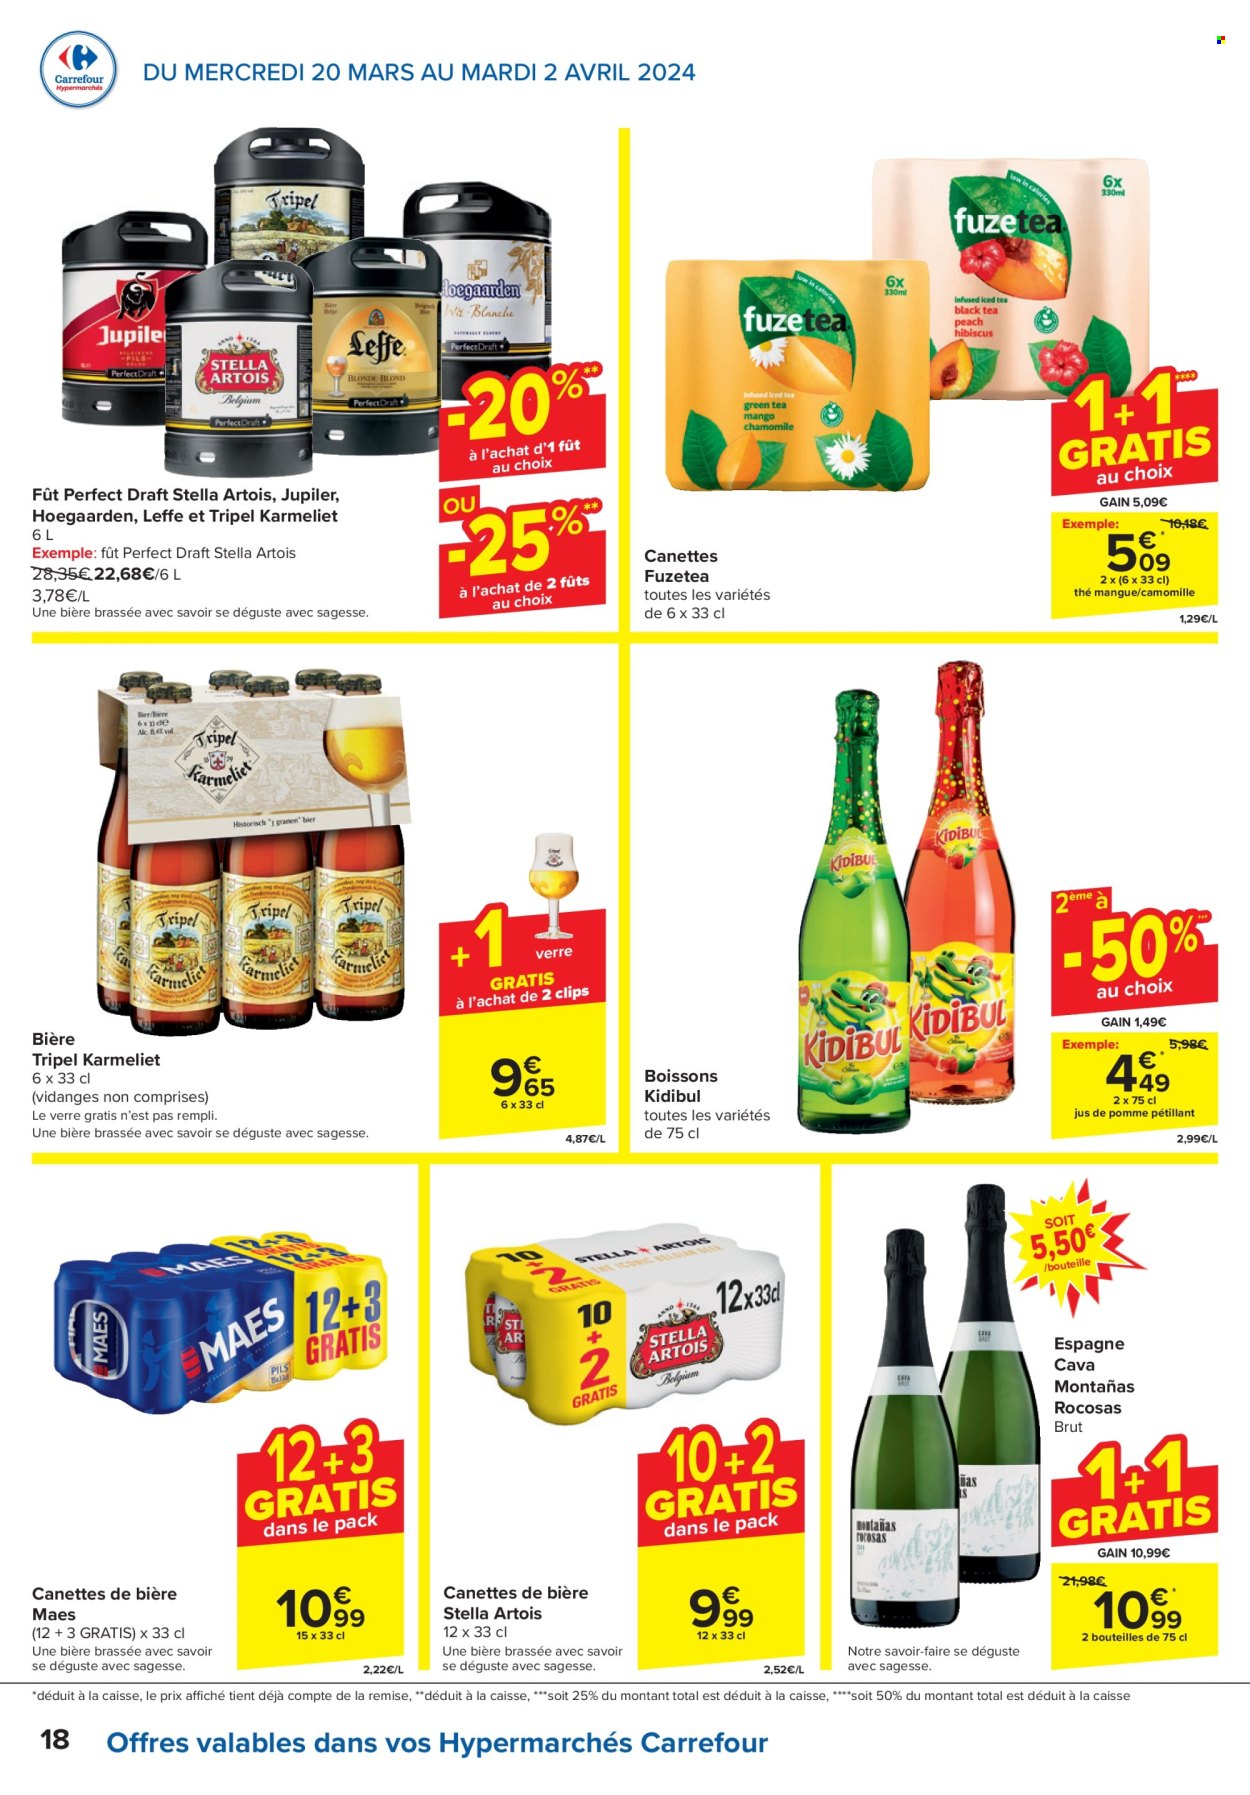 Catalogue Carrefour hypermarkt - 20.3.2024 - 2.4.2024. Page 18.